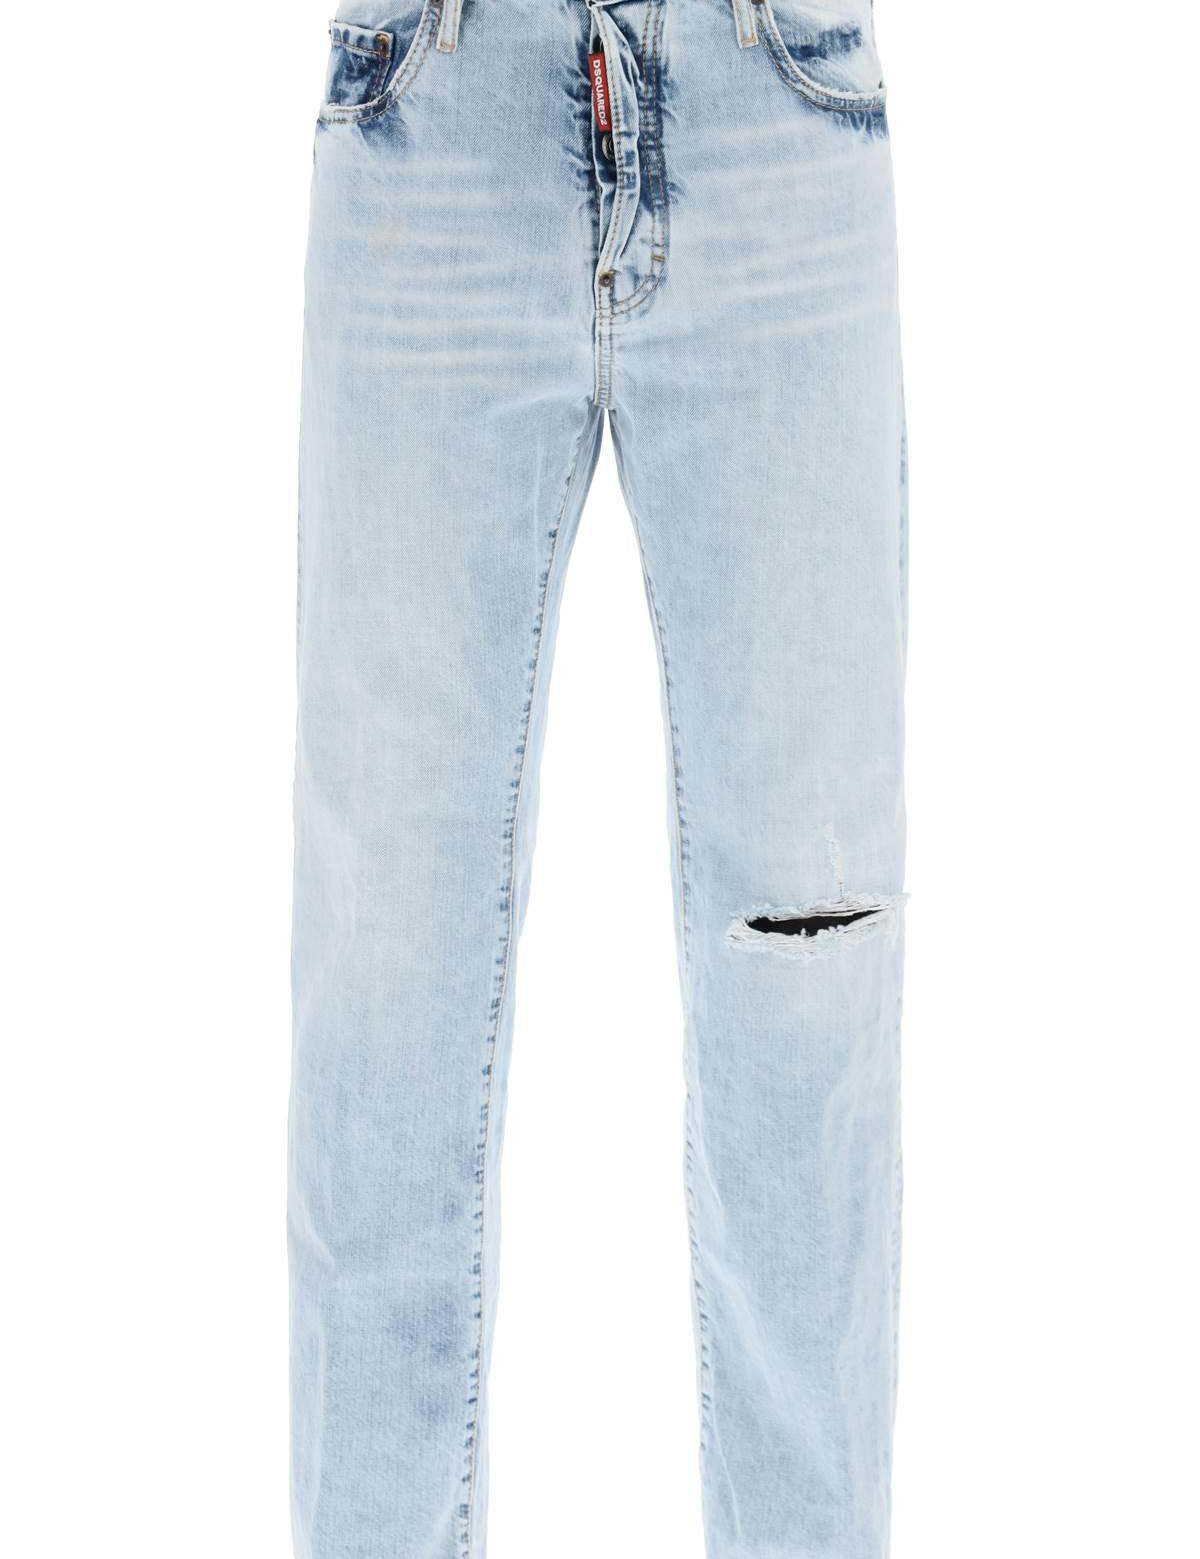 dsquared2-light-wash-palm-beach-jeans-with-642.jpg